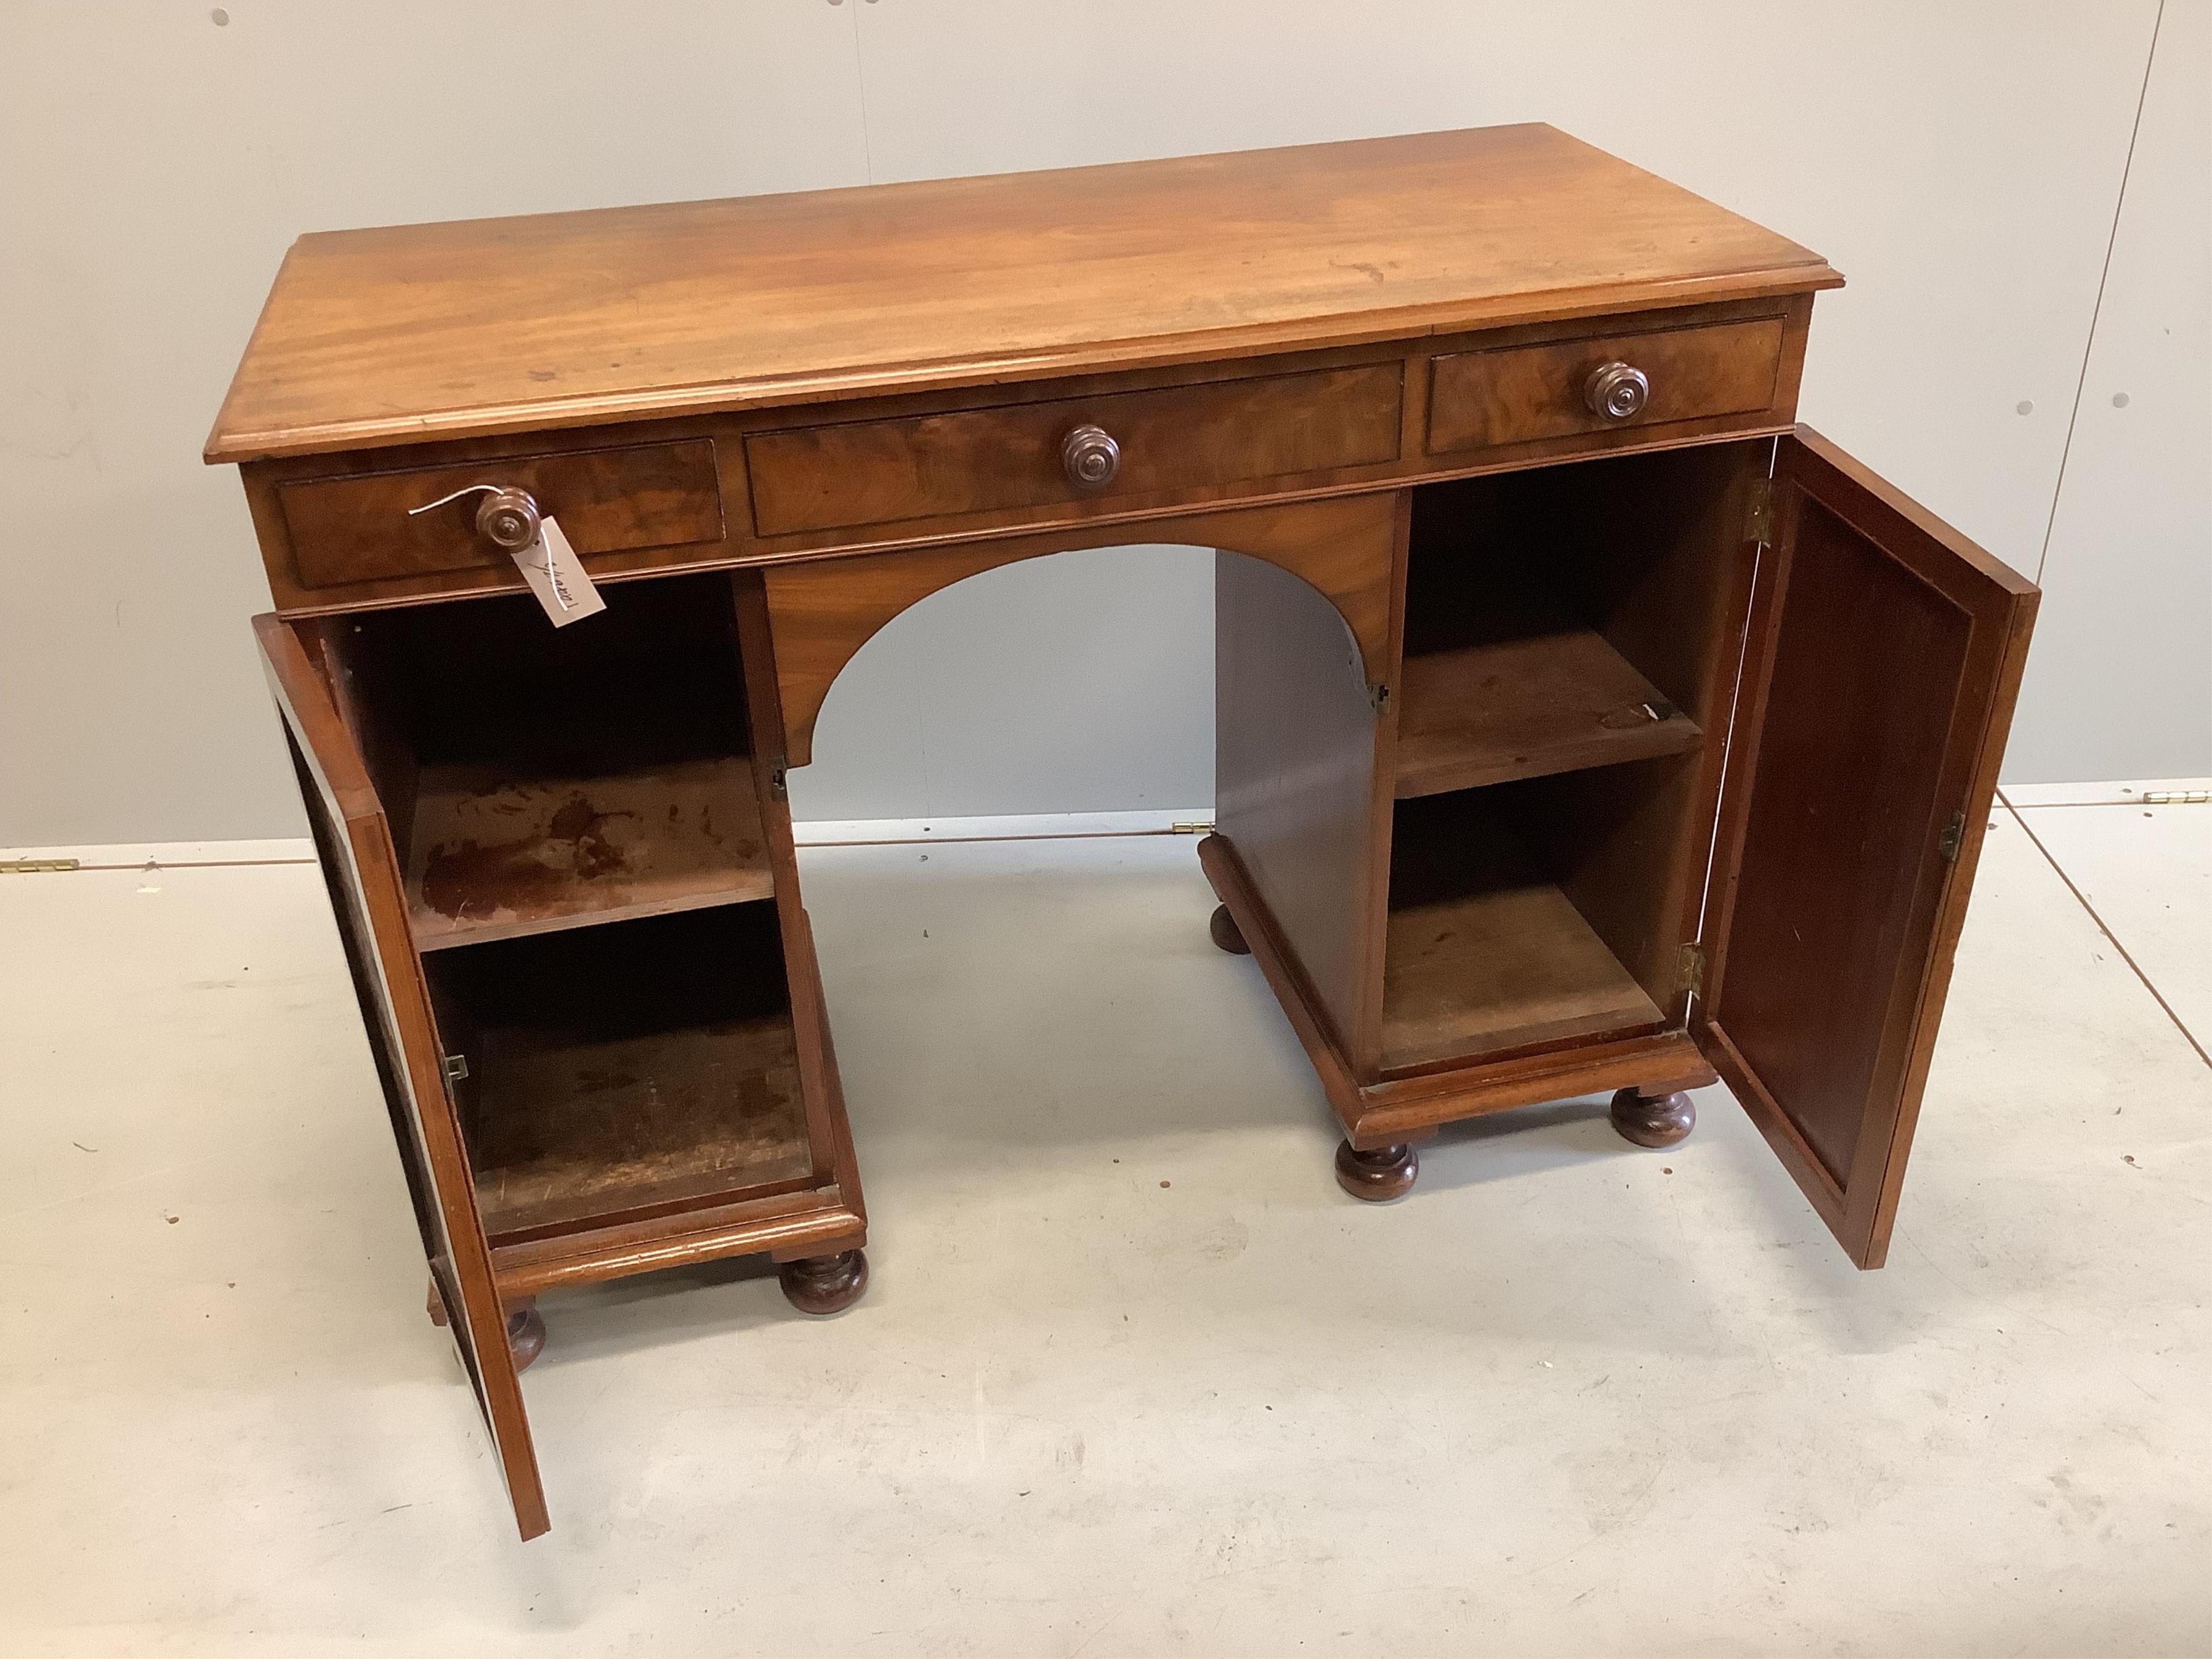 An early Victorian mahogany kneehole dressing table, width 107cm, depth 48cm, height 79cm. Condition - fair